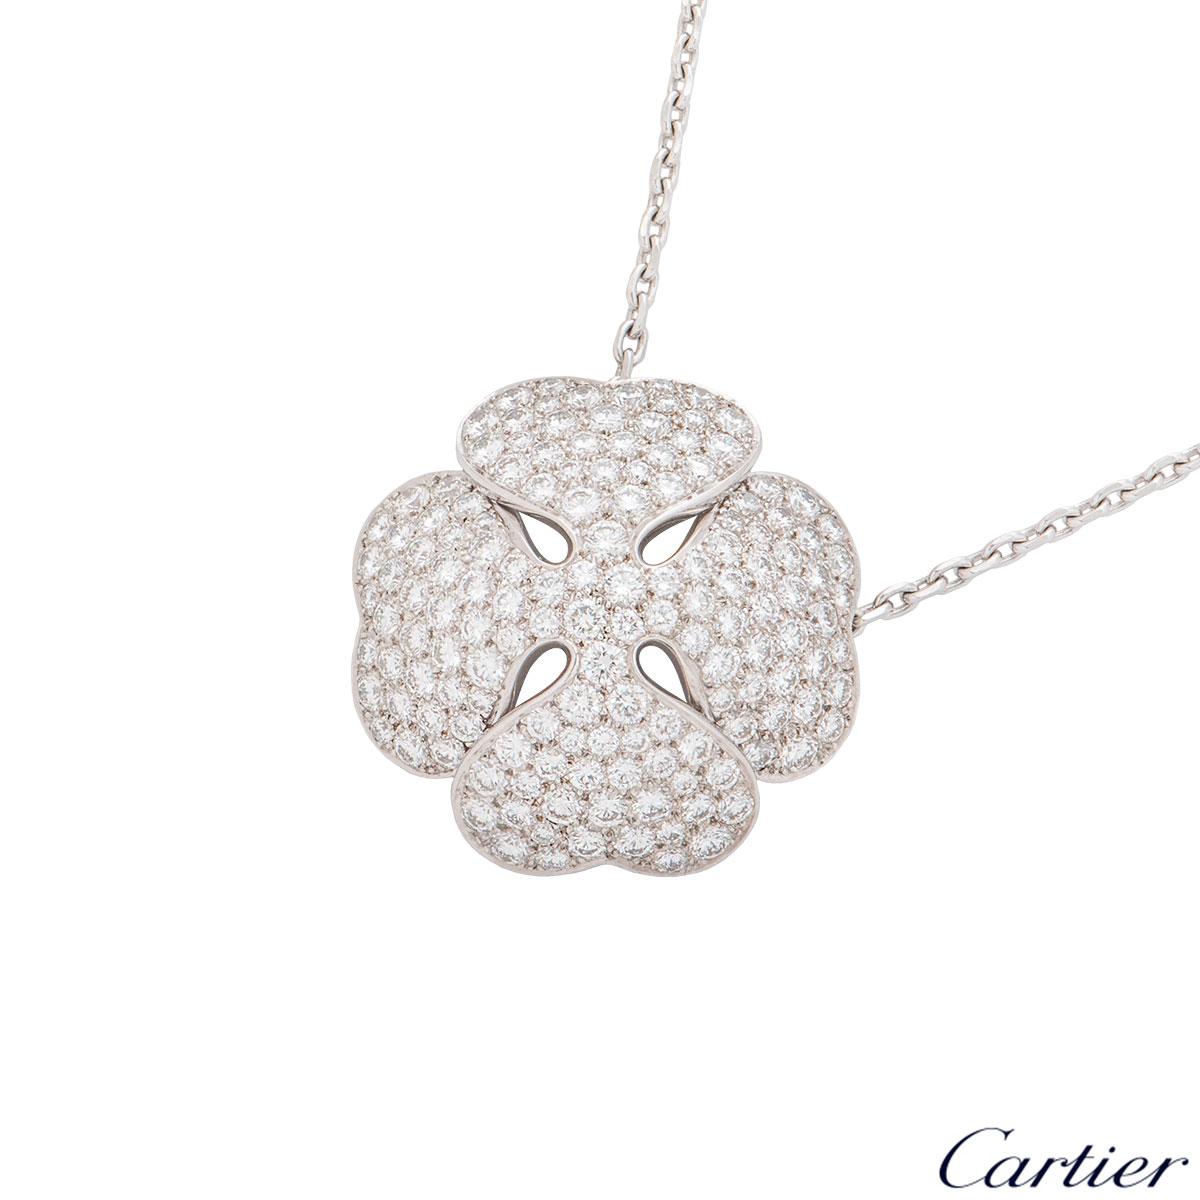 An 18k white gold diamond Cartier necklace from the 2001 collection. The necklace comprises of a four leaf clover set with pave round brilliant cut diamonds. The round brilliant cut diamonds have an approximate weight of 7.00ct. The necklace